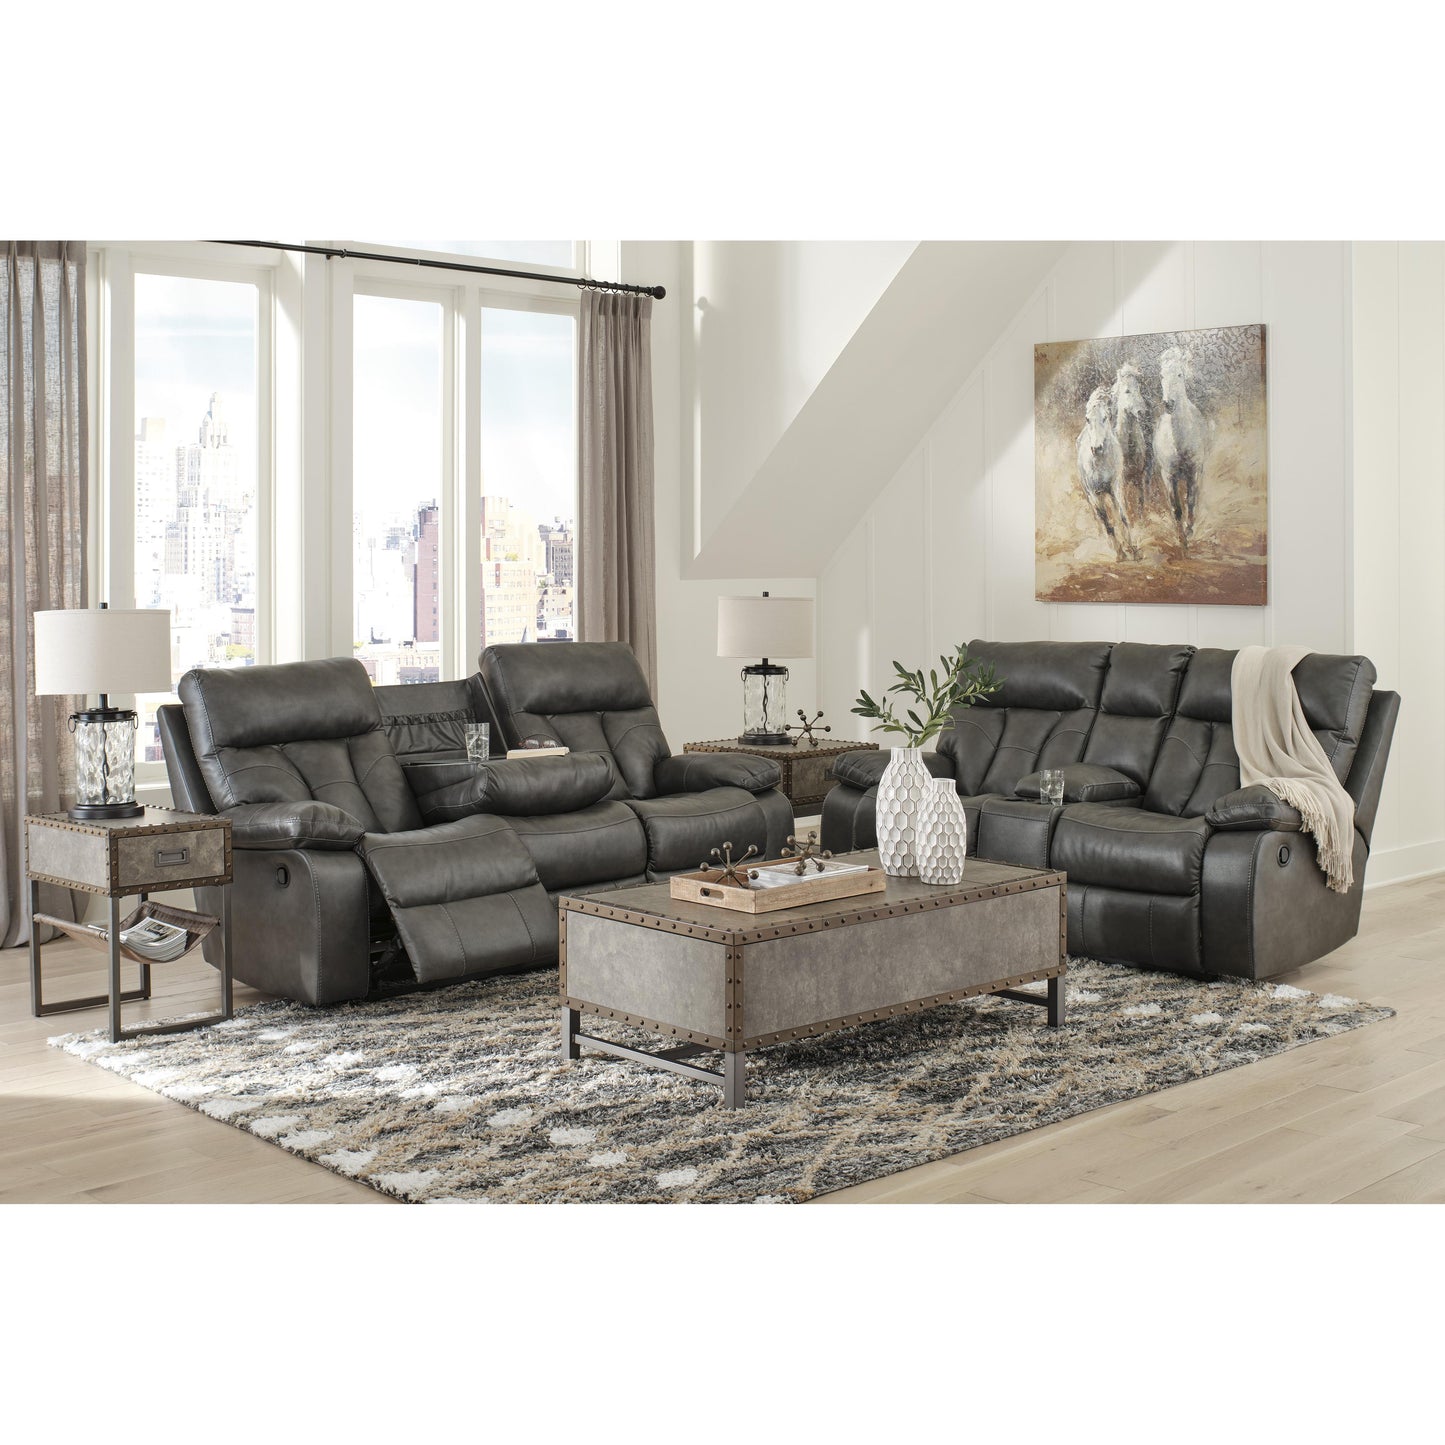 Signature Design by Ashley Willamen Power Reclining Leather Look Loveseat 1480194 IMAGE 8